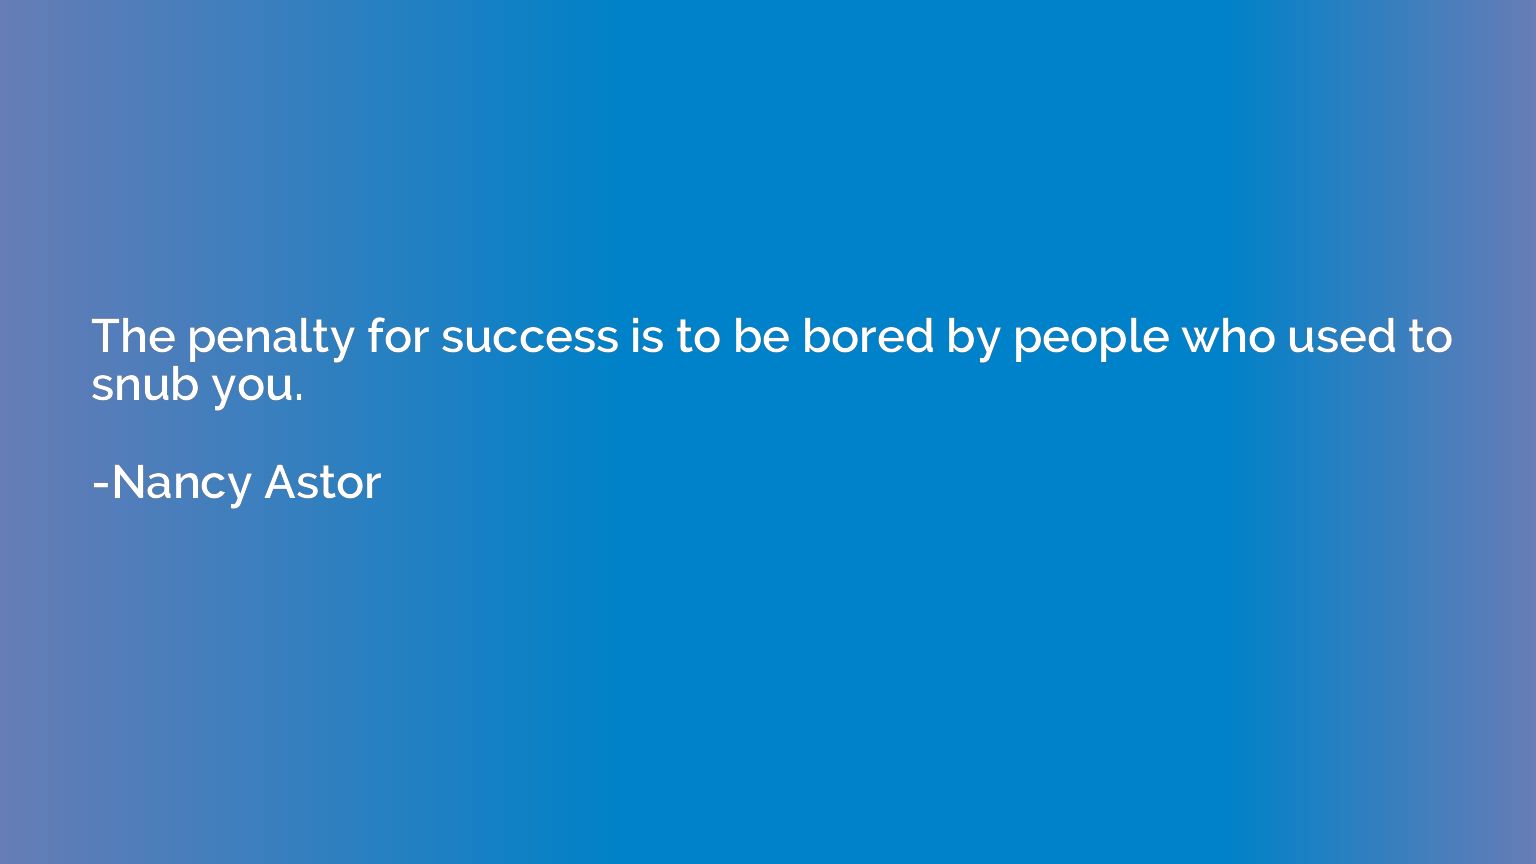 The penalty for success is to be bored by people who used to